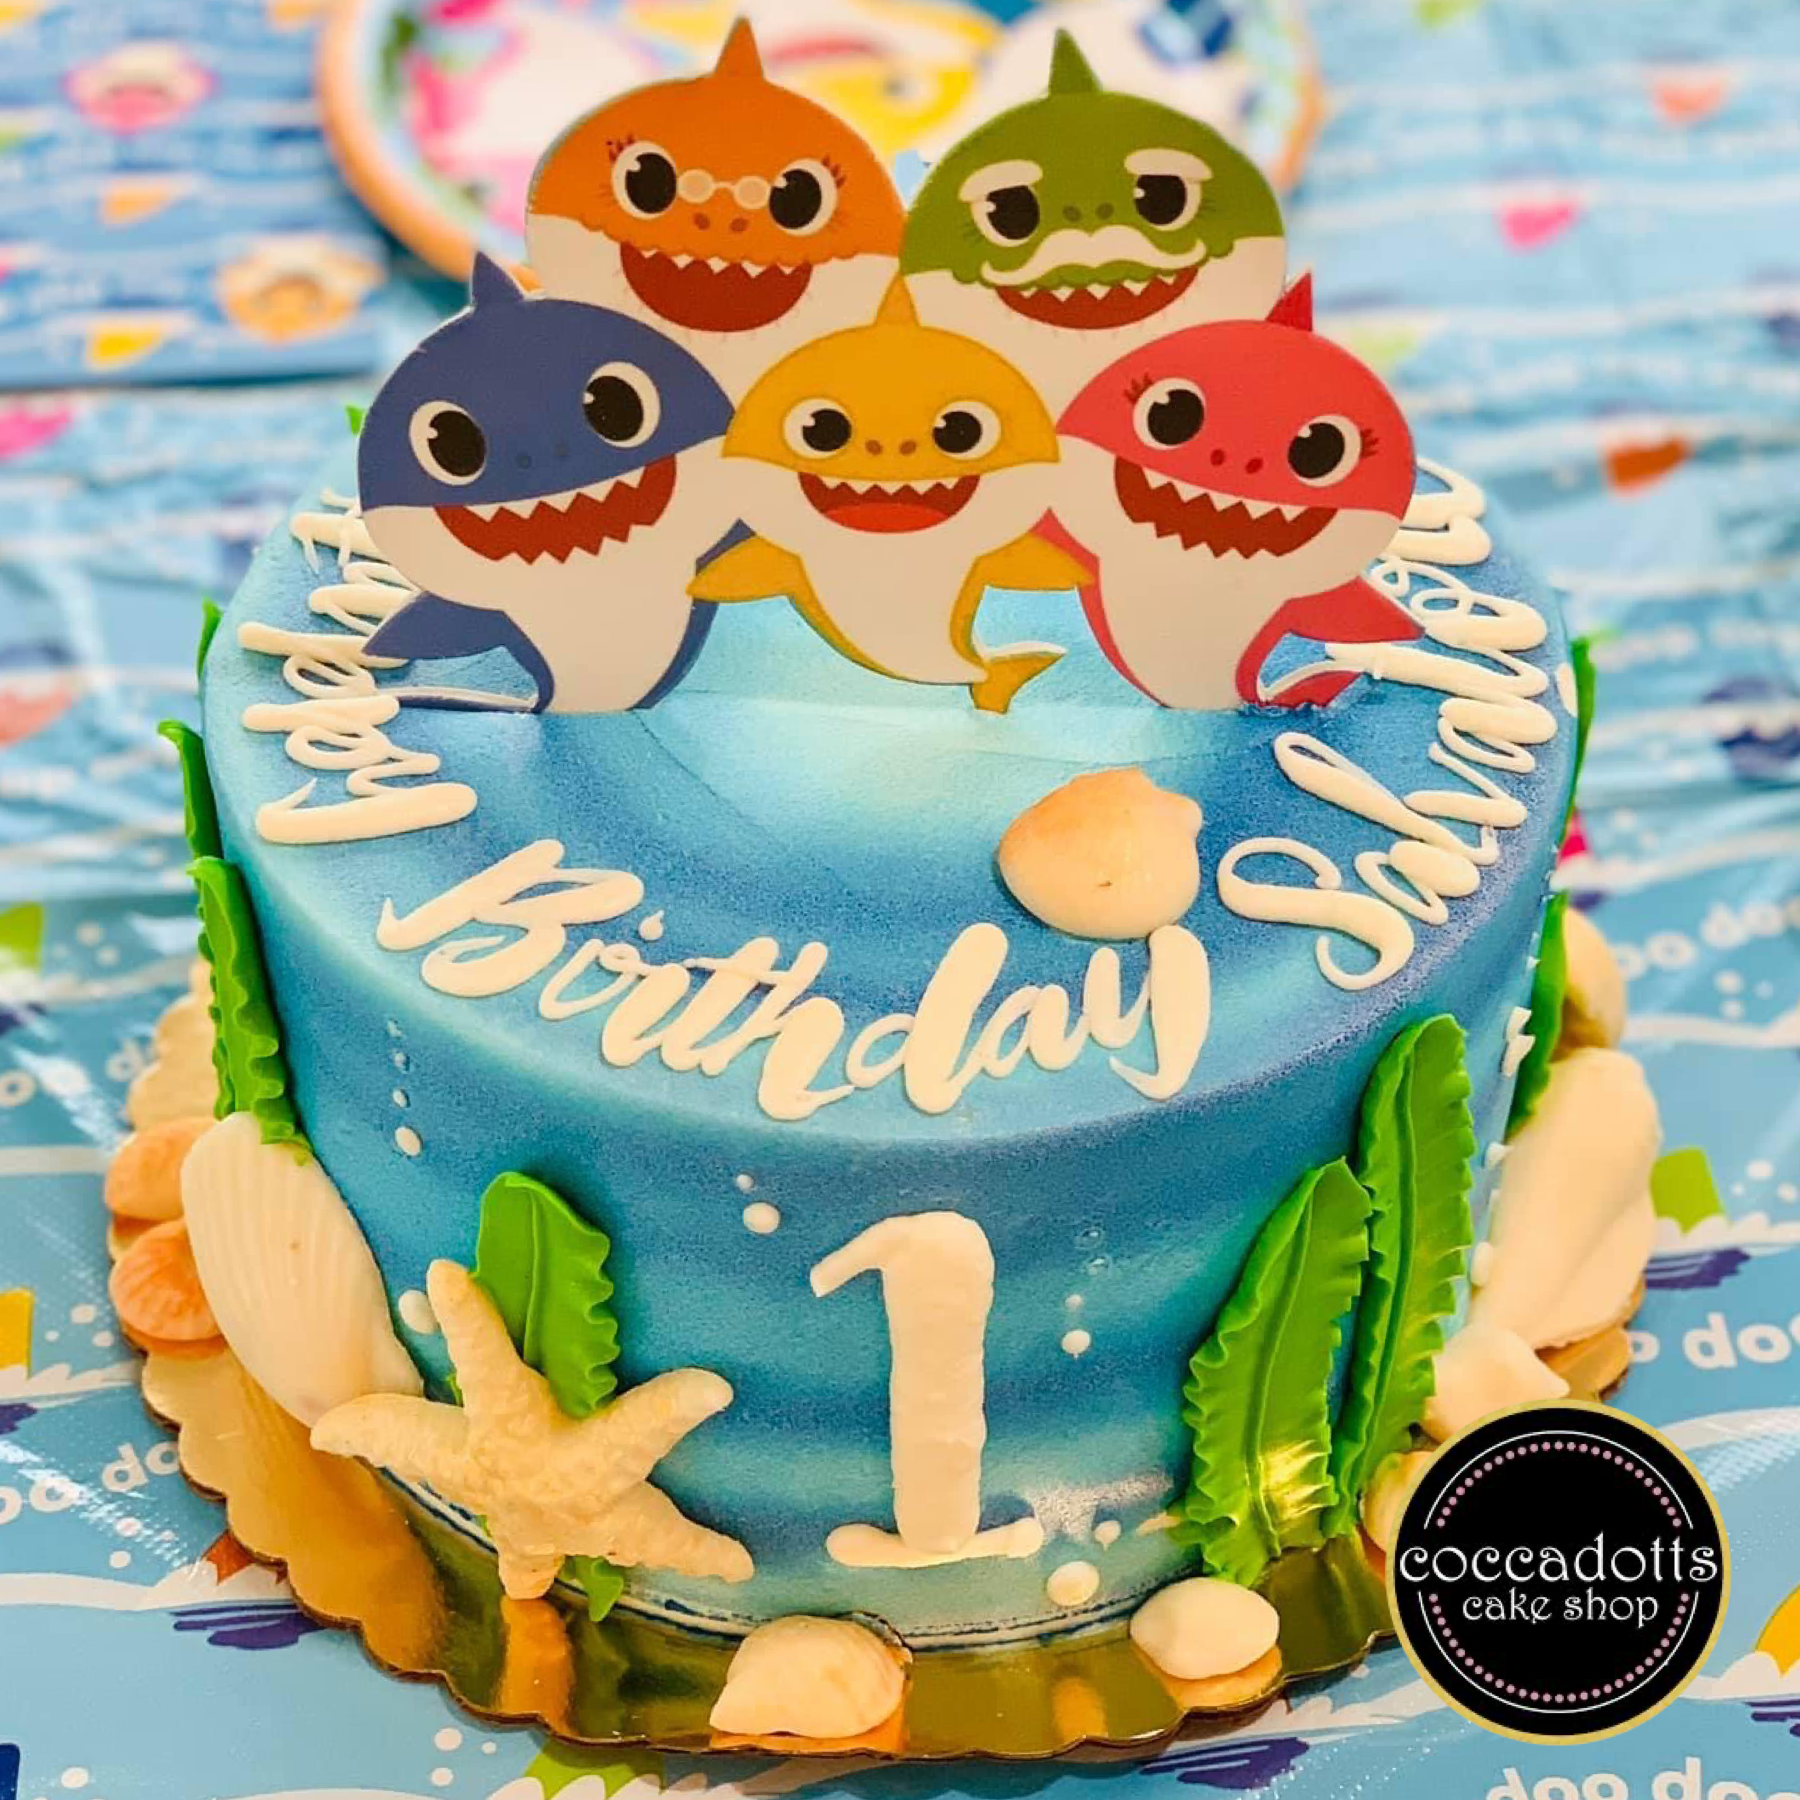 I made a baby shark cake for my 2year old's birthday. My husband requested  no Italian buttercream, but to used whipped cream frosting instead. Ooooh  man it certainly makes it hard to